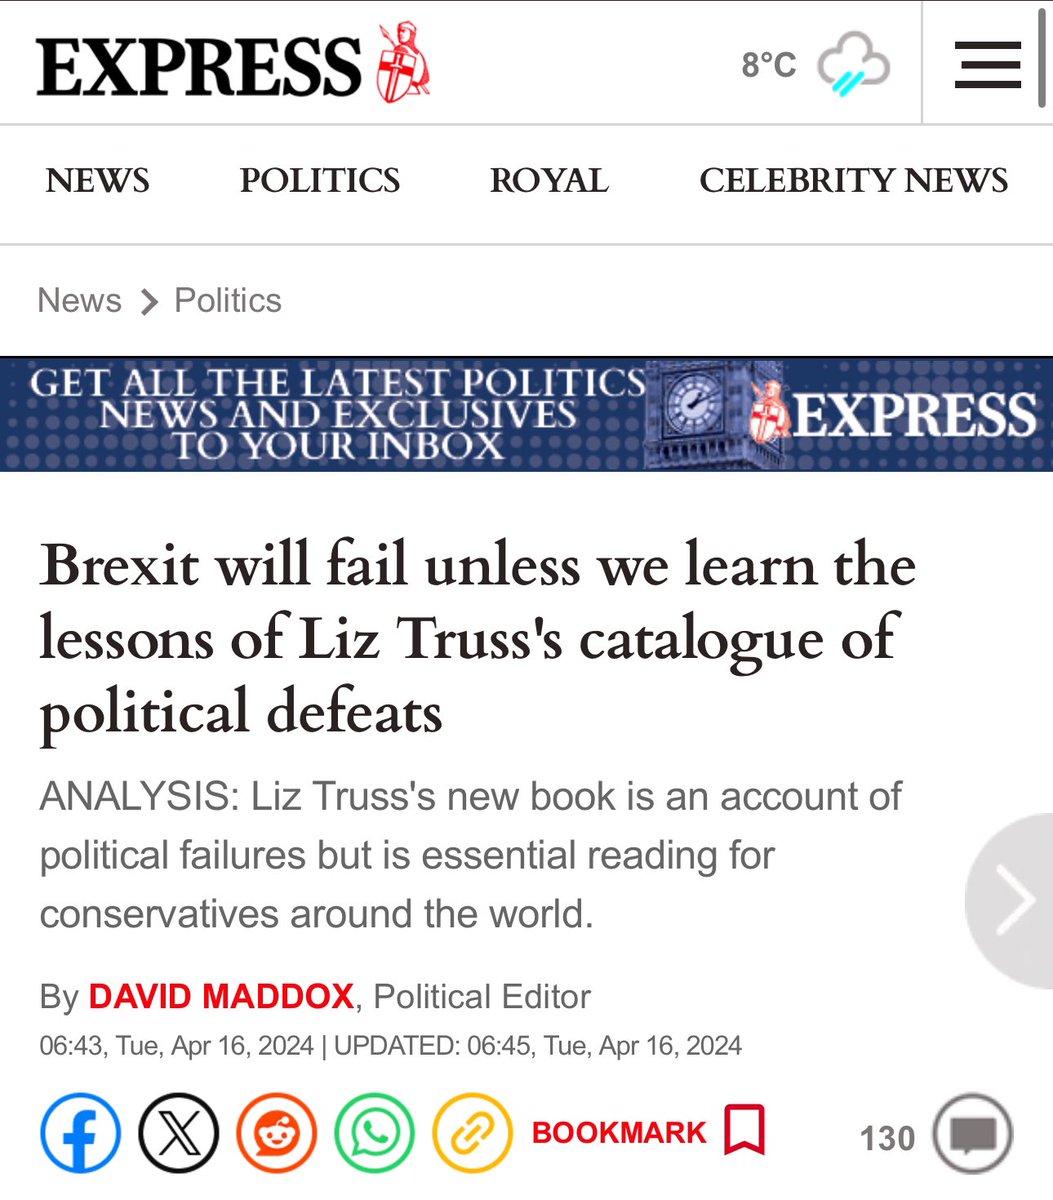 Aha so unless people read the Lettuce’s book, #Brexit will fail says the BrExpress! Ps Brexit was always going to fail to deliver its promises bc it was sold on whopping great lies by charlatans.